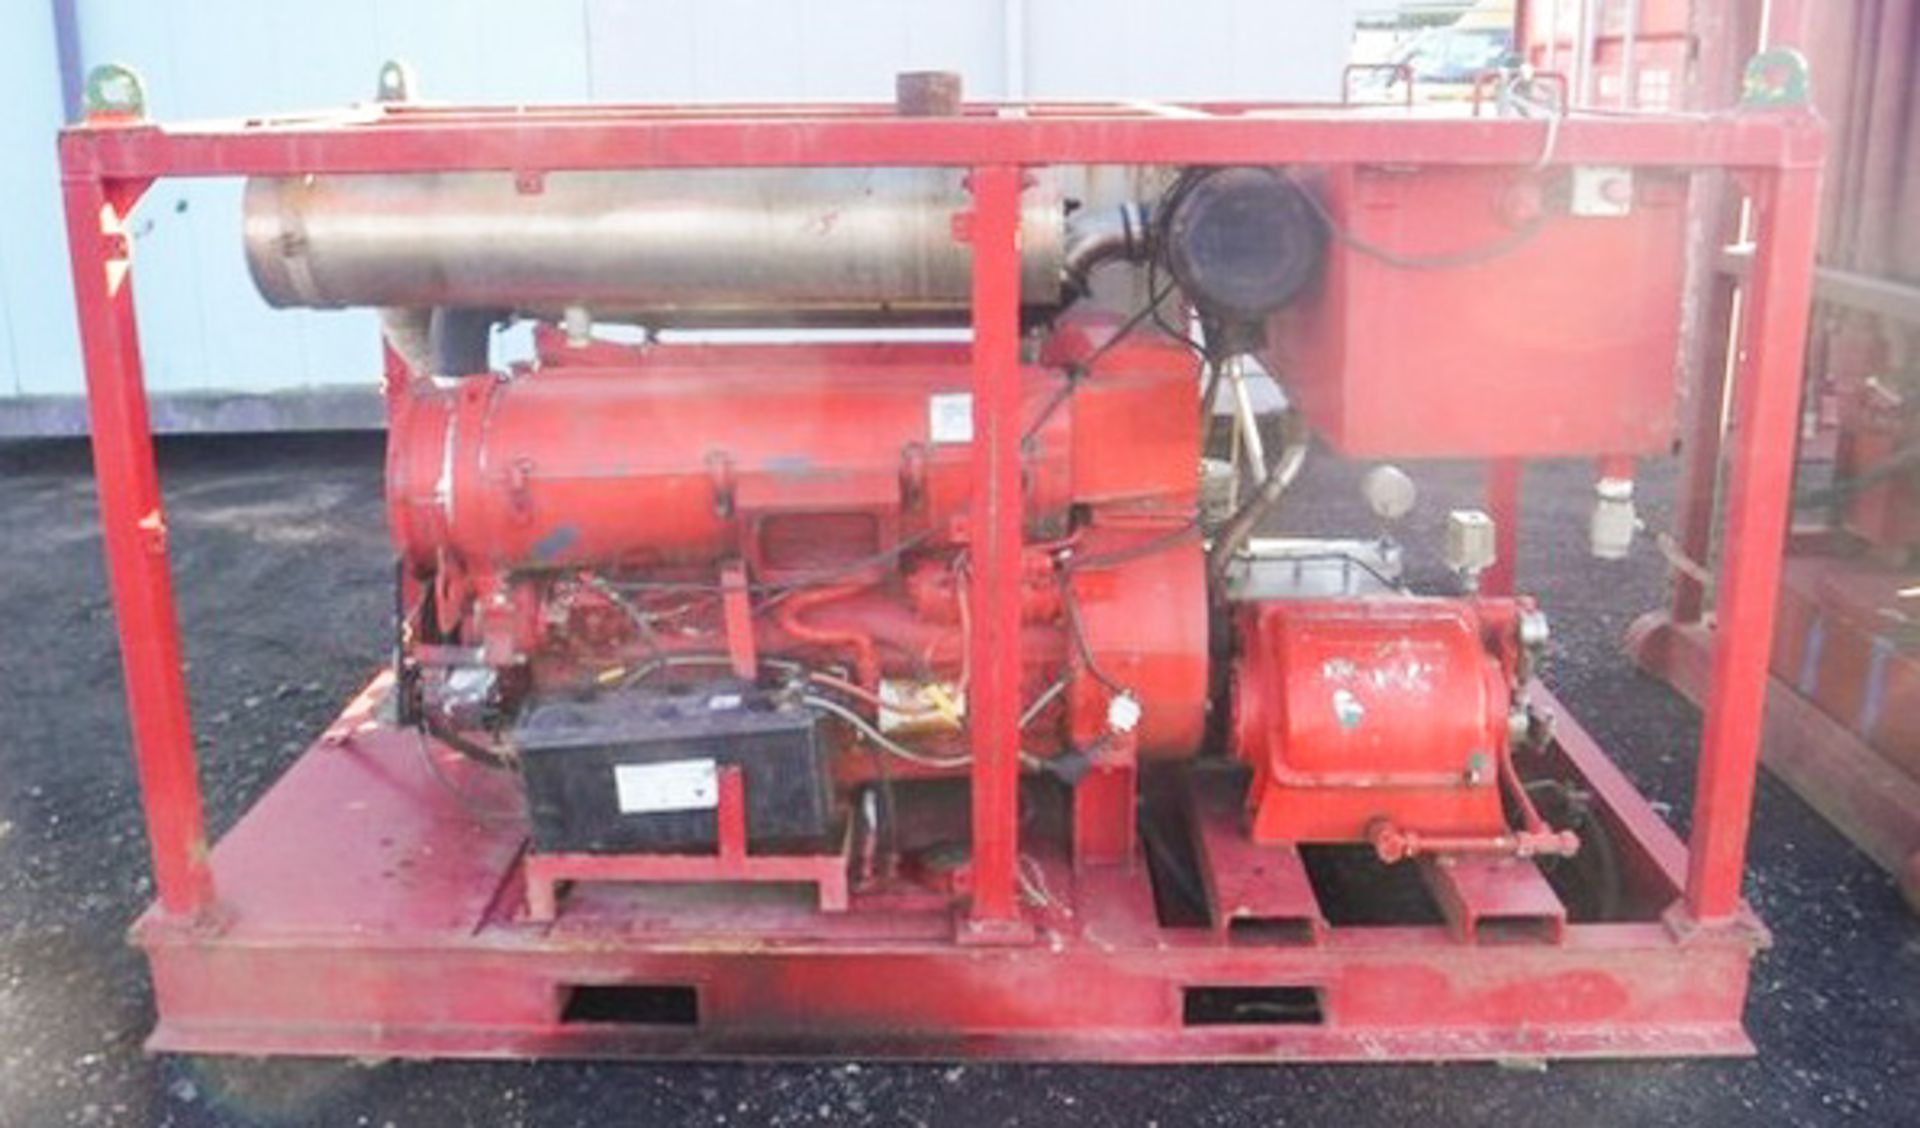 V8 HIGH PRESSURE HYDRAULIC PUMP SKID MOUNTED. (RED), NO PLATES OR ID NUMBERS - Image 3 of 6